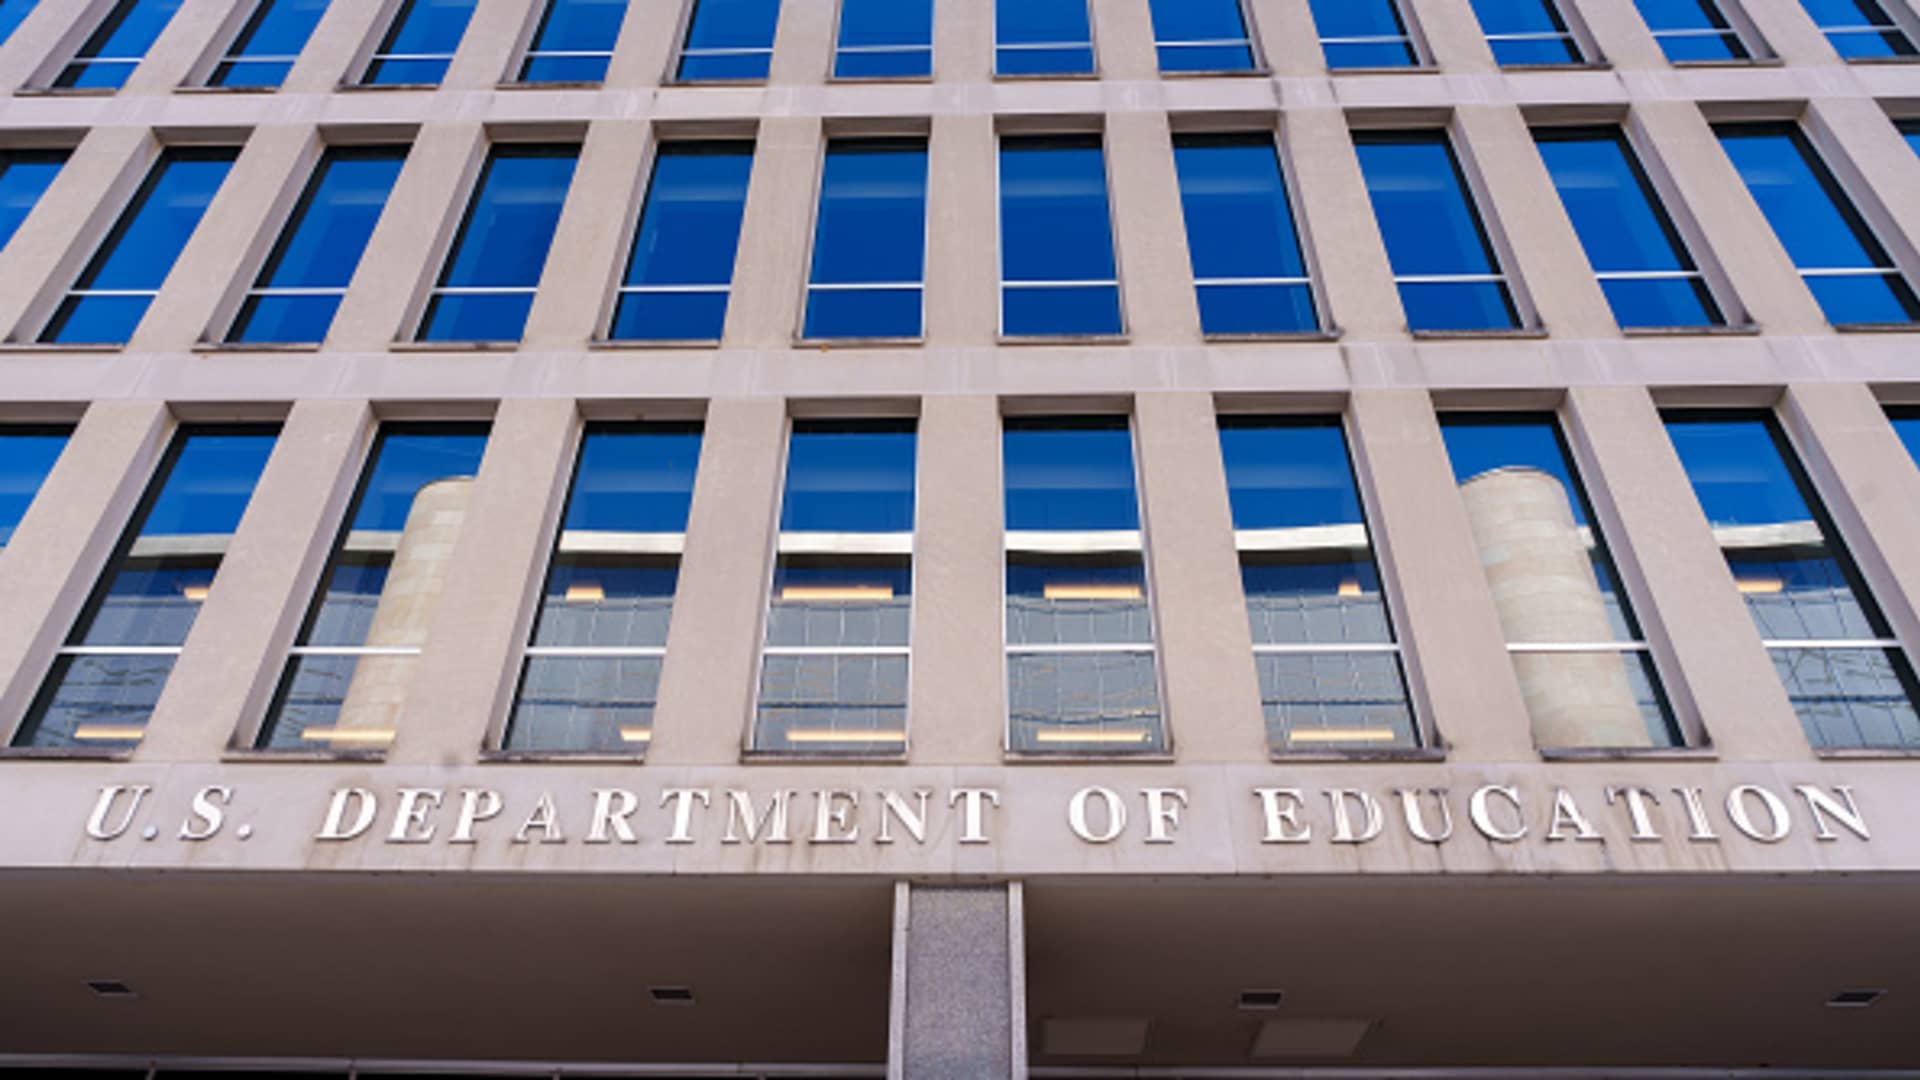 The Education Department will transfer some student loan borrowers to a different servicer. Here's what you need to know